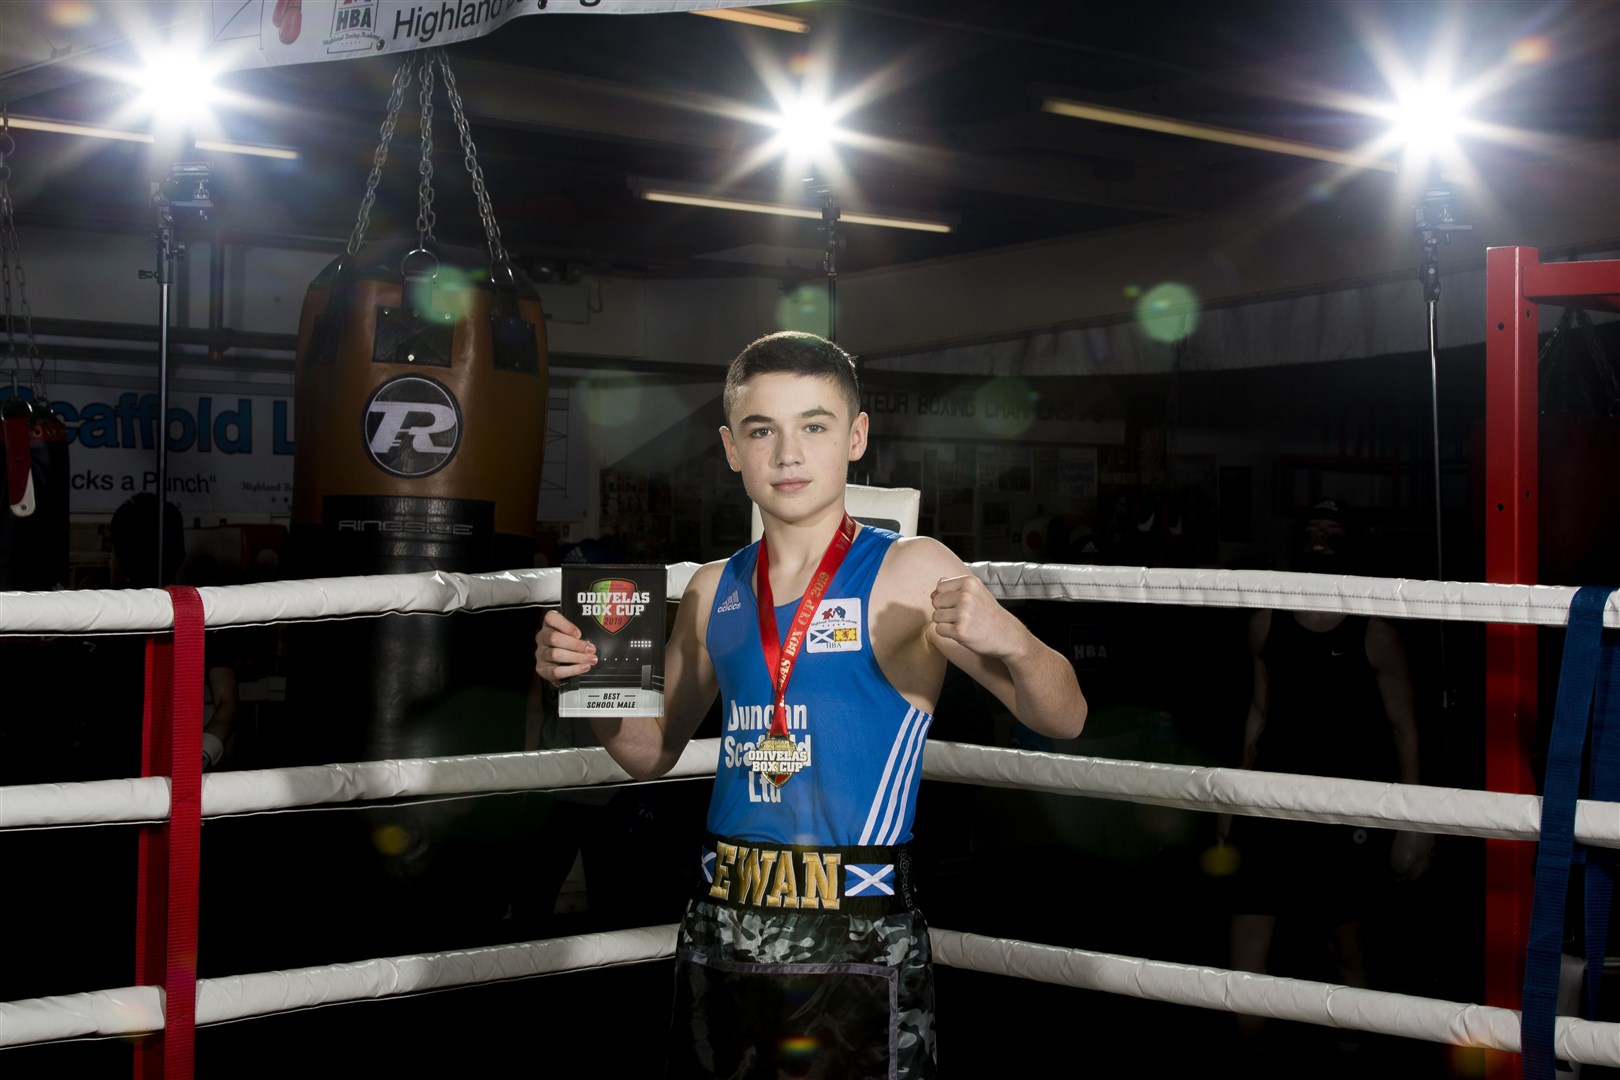 Highland Boxing Academy teenager Ewan Gliniecki won gold in the Odivelas Box Cup in Portugal, also being named best schoolboy at the competition. Picture: David Rothnie